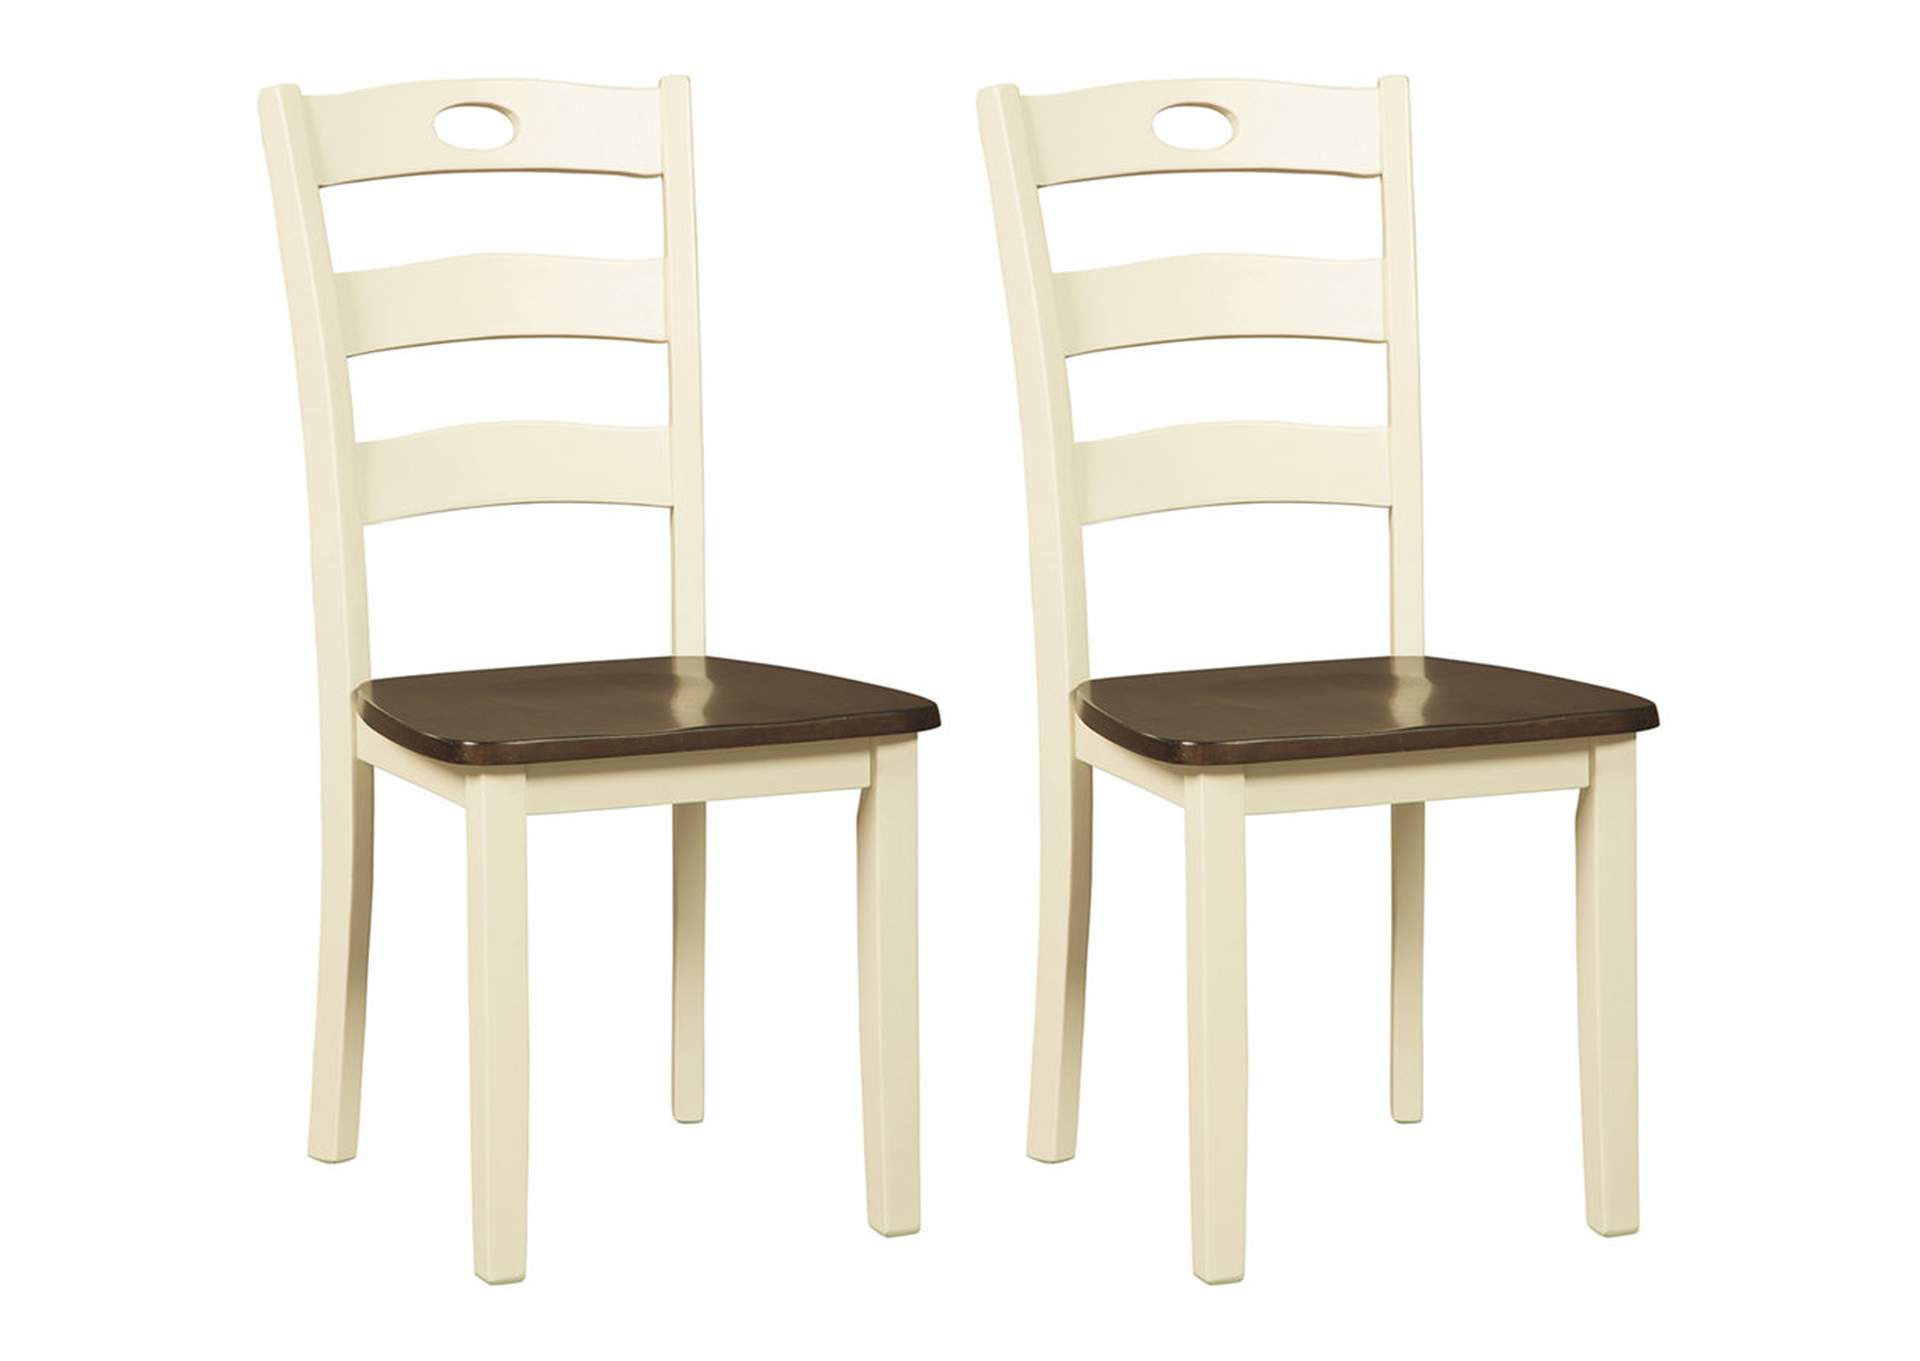 Woodanville 2-Piece Dining Room Chair,Signature Design By Ashley